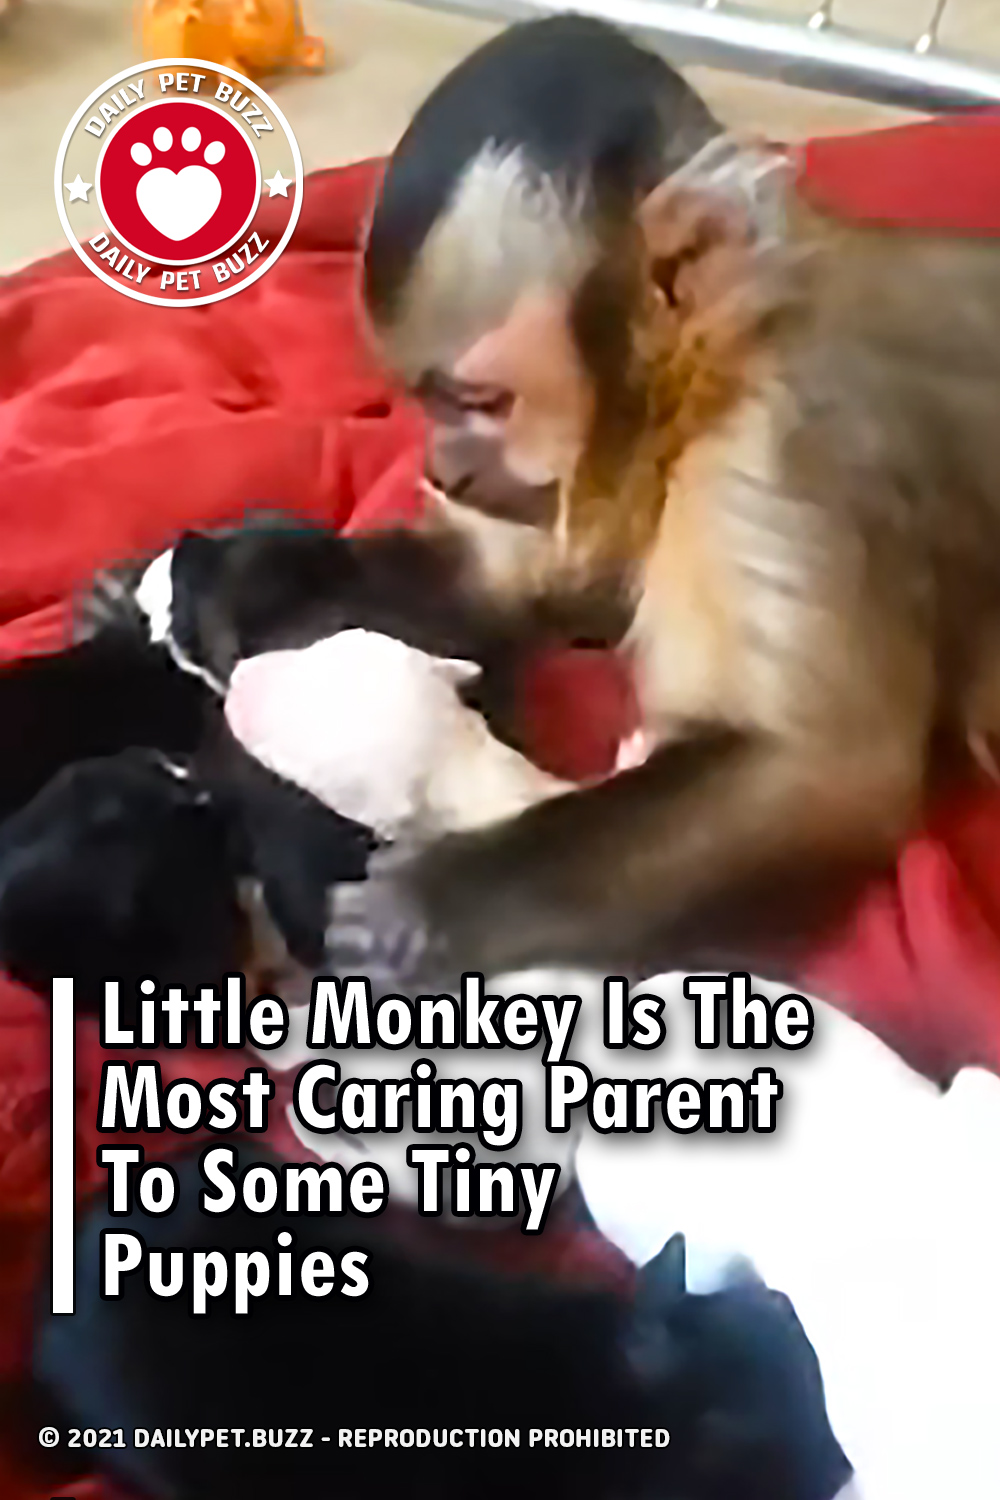 Little Monkey Is The Most Caring Parent To Some Tiny Puppies